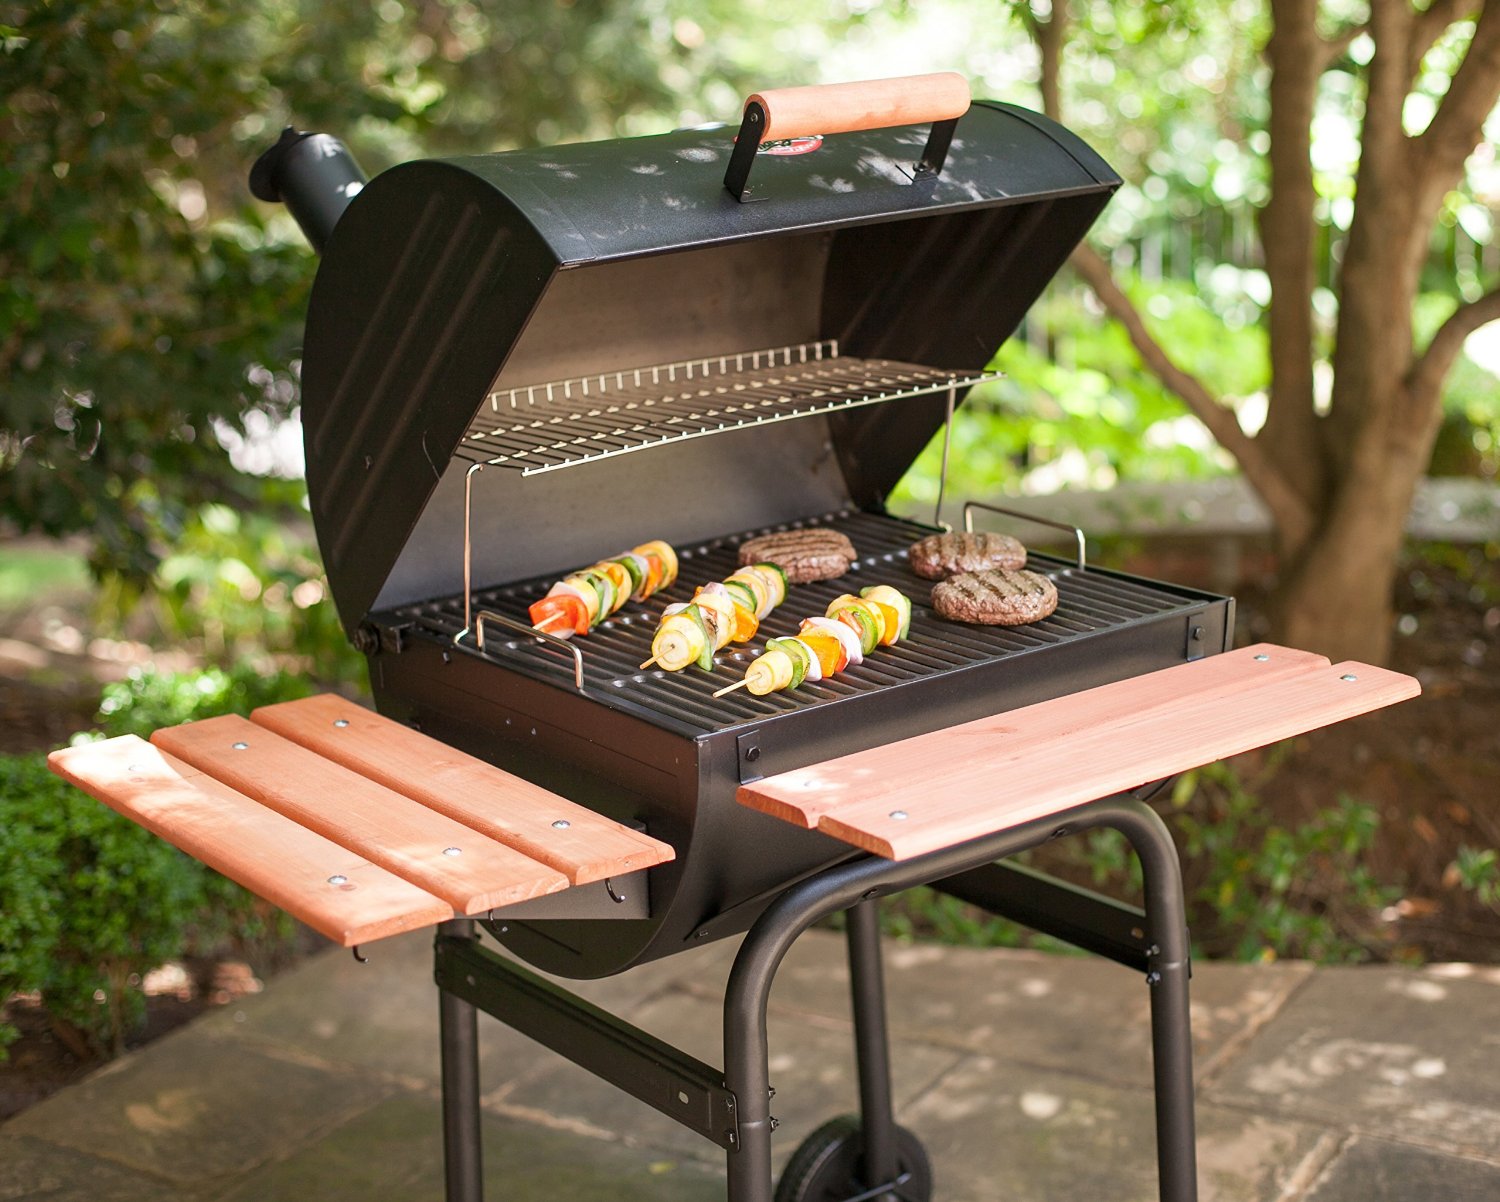 Top 10 Best Charcoal Grills 2018 Home & Outdoor Charcoal Grill reviews